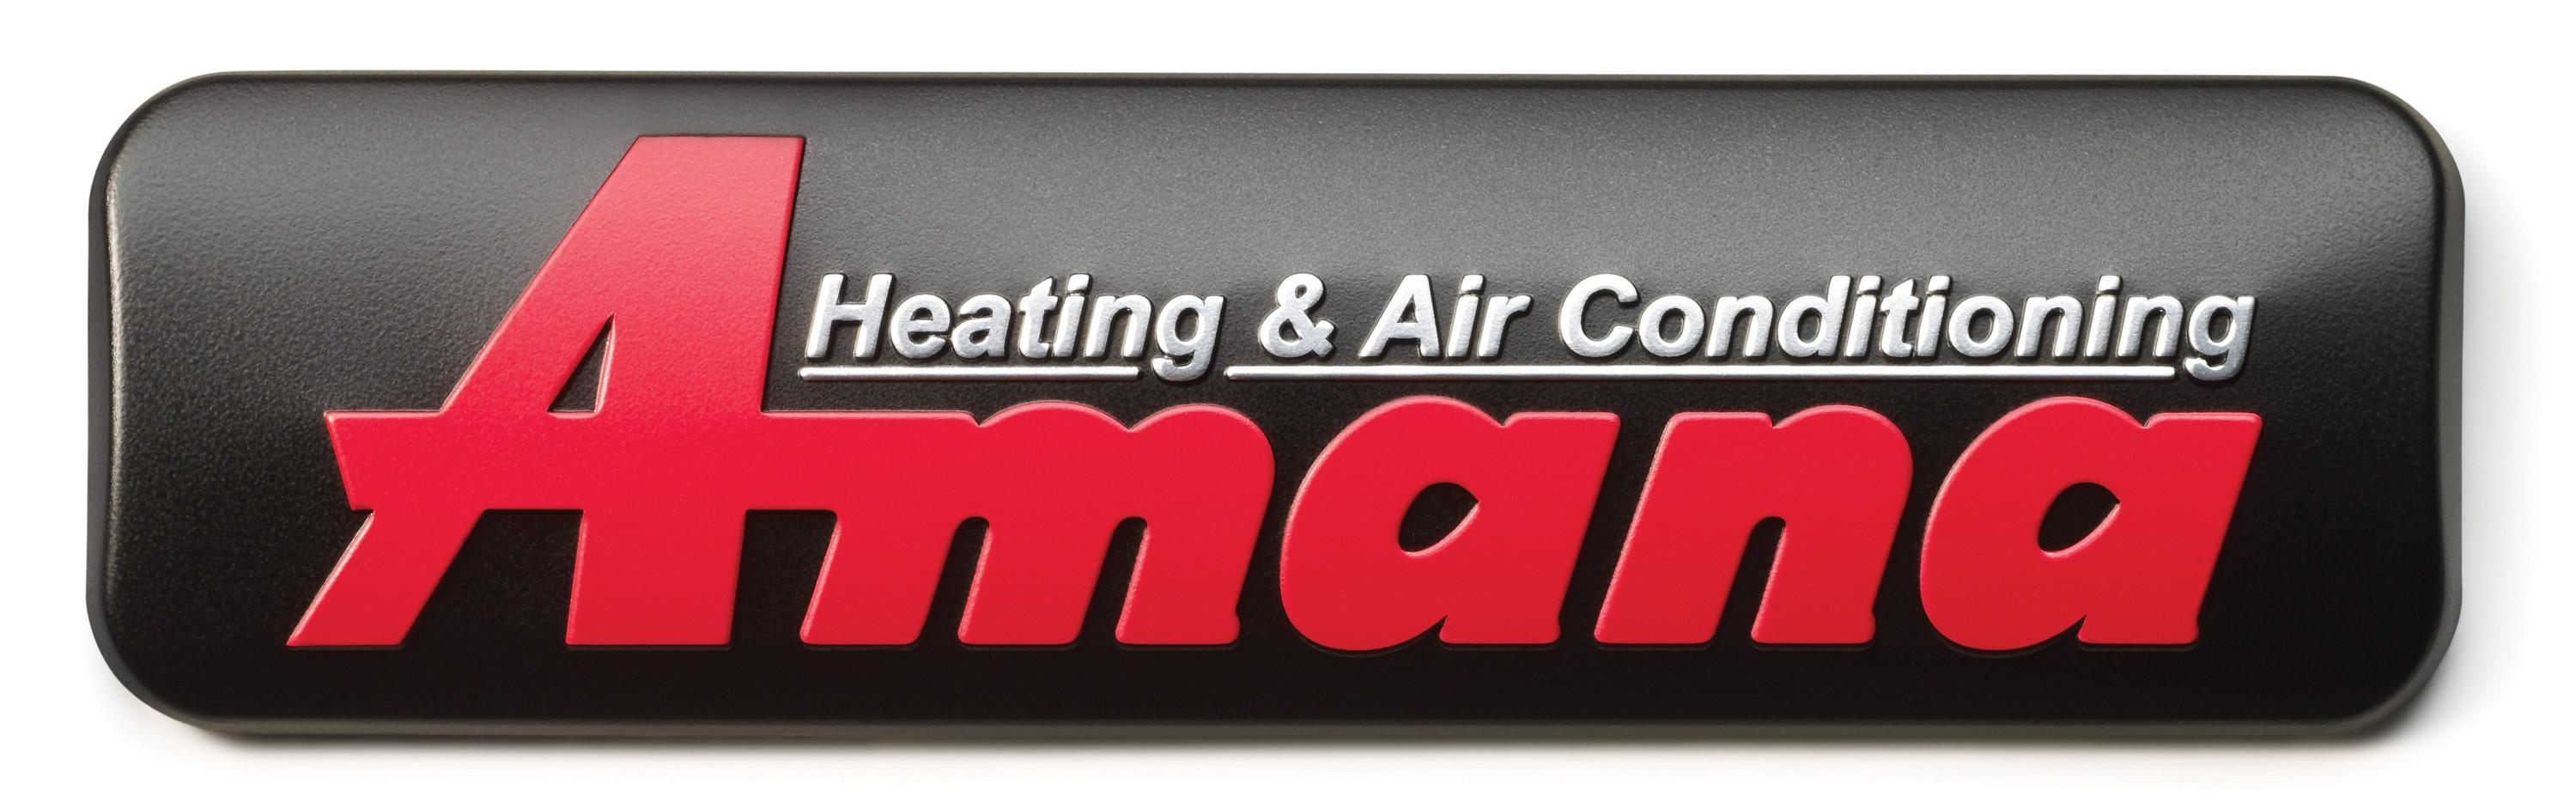 New Amana Logo - AMANA PRODUCTS. ACLV Heating & Air Conditioning